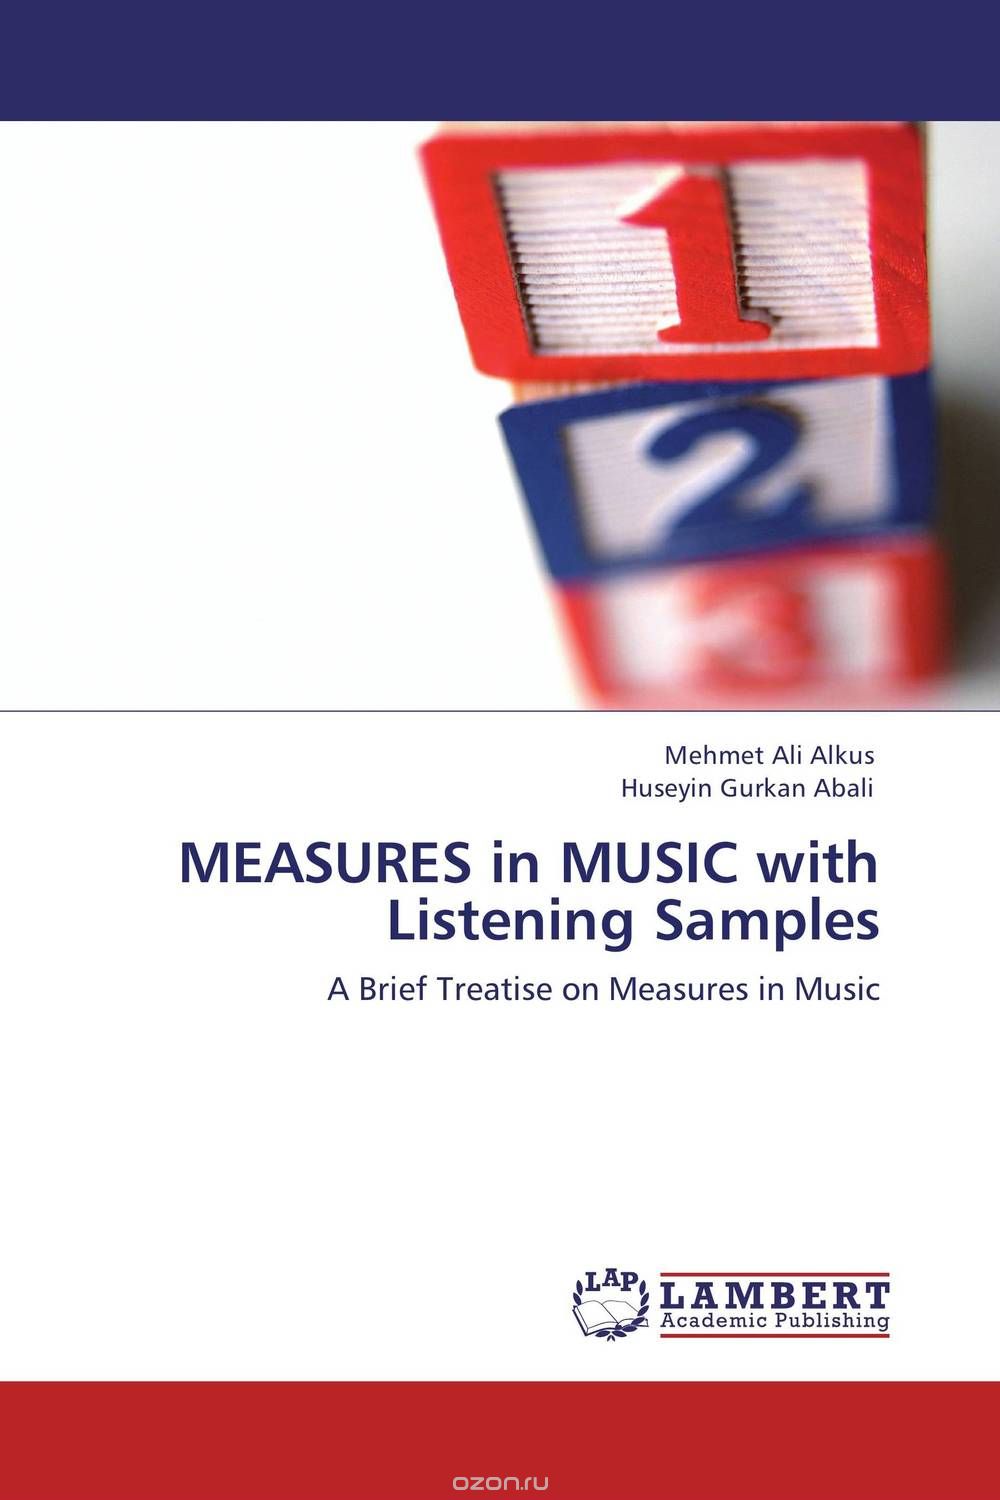 MEASURES in MUSIC with Listening Samples